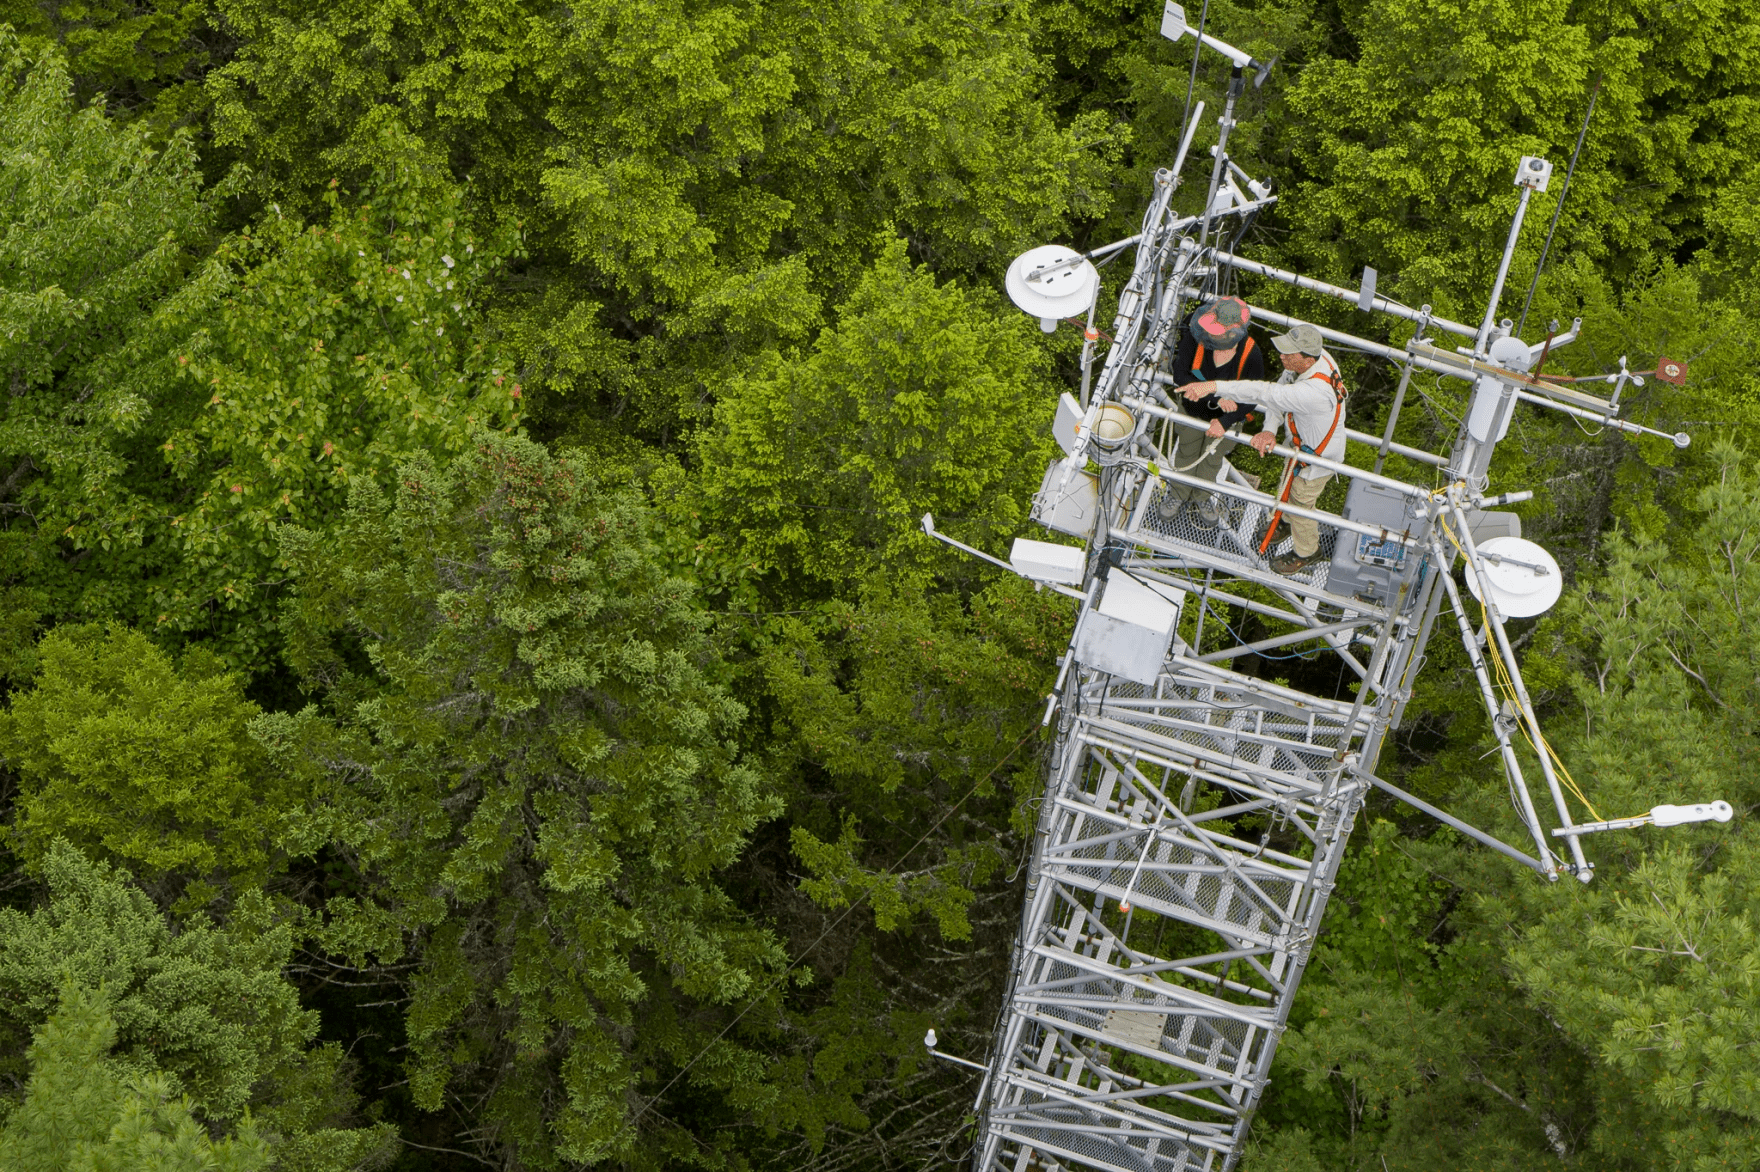 John Lee (right), a University of Maine research associate who manages the Howland Research Forest, at the top of its main research tower with Maine Public's Susan Sharon. (Courtesy Kris Bridges)